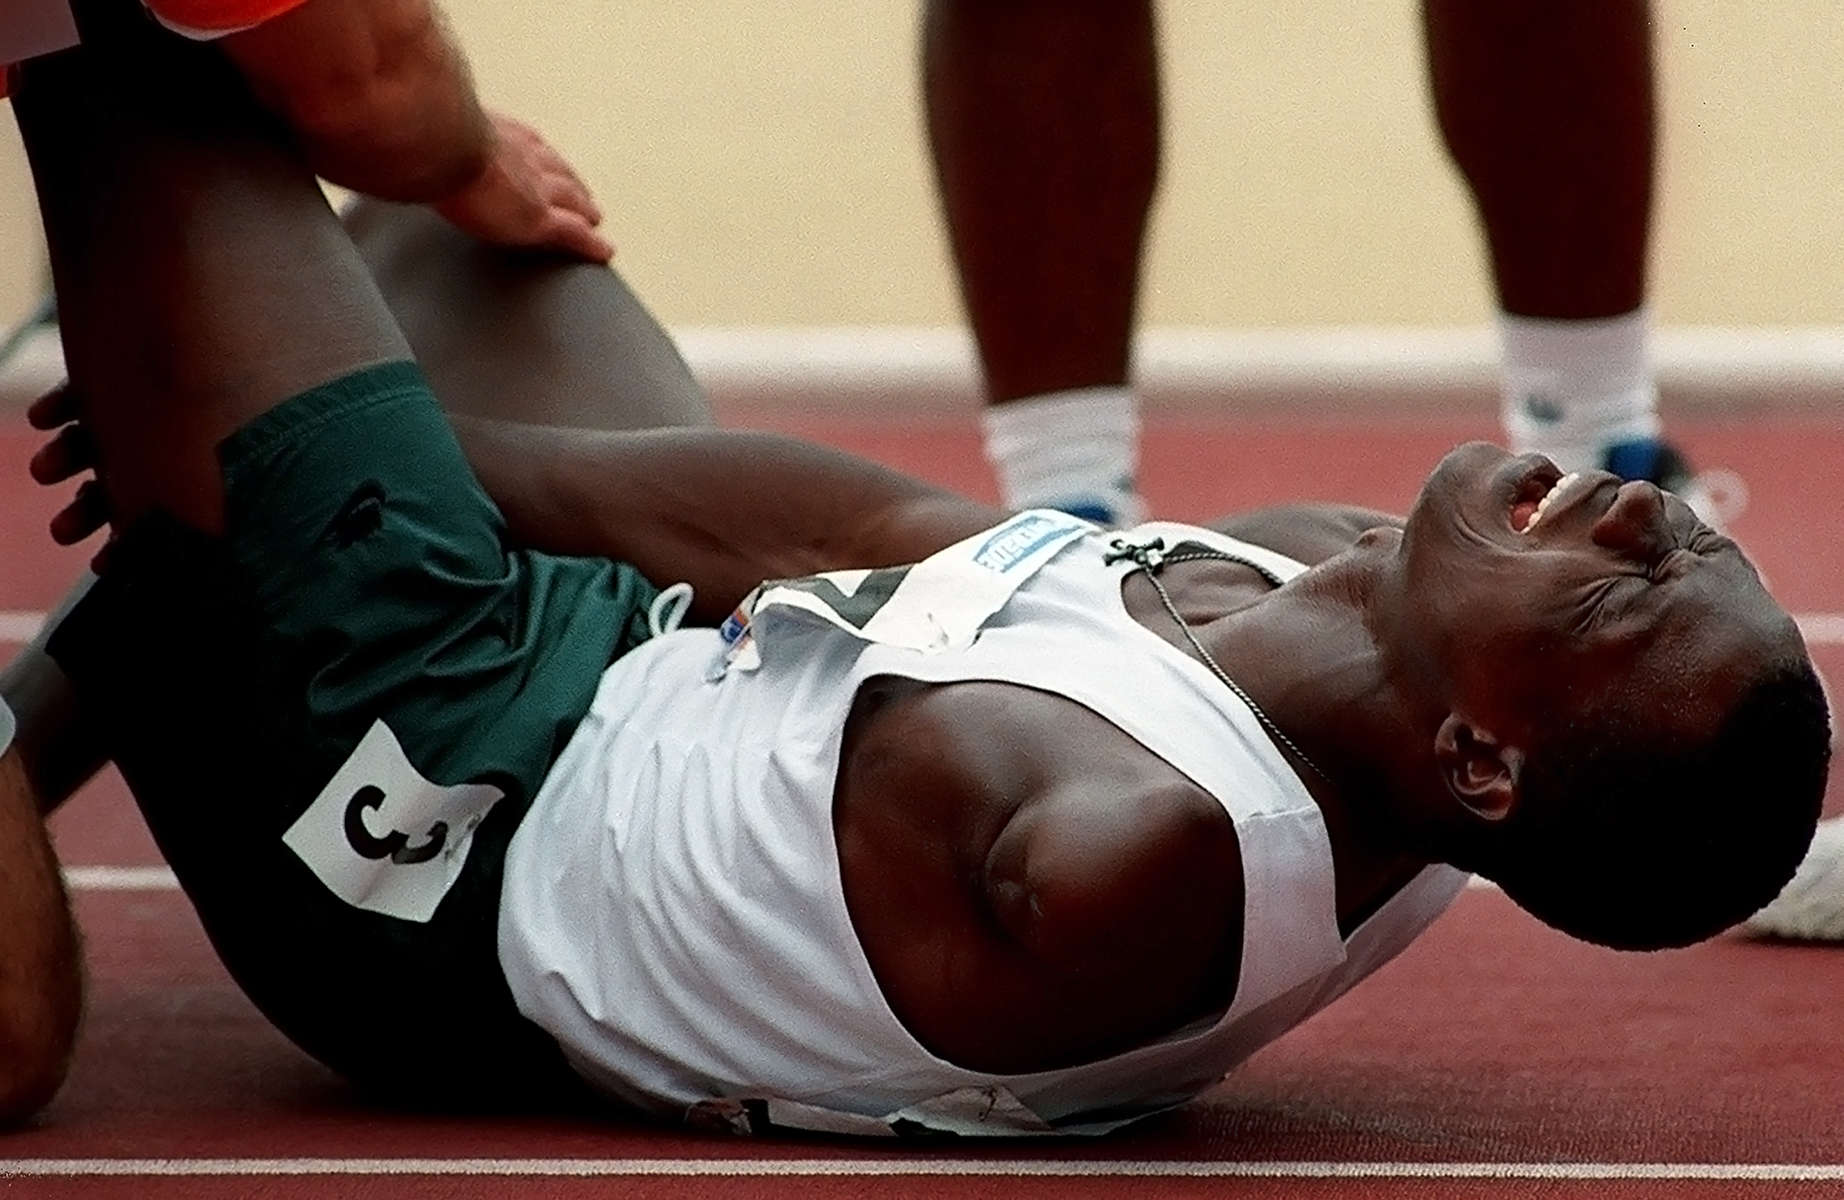 Adeoye Ajibola of Nigeria reacts after pullinghis hamstring muscle in the 100 meter amputee classification race. Ajibola won the gold and a new Paralympic world record in the 100 meter event with the time of 11.13 seconds. (The San Bernardino Sun / Mark Zaleski)